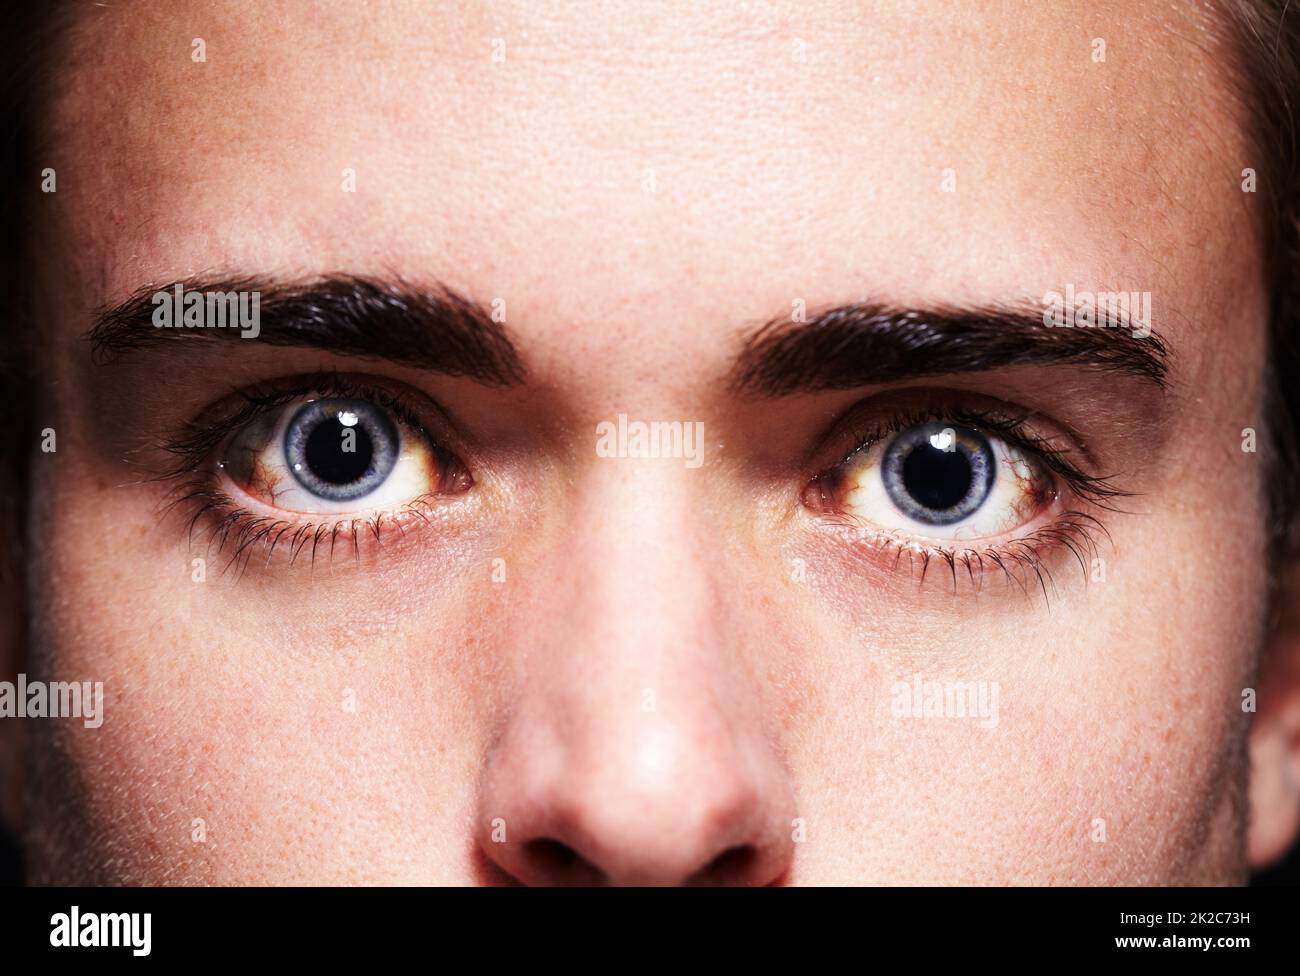 High as a kite. Closeup portrait of a young mans face with dilated pupils. Stock Photo